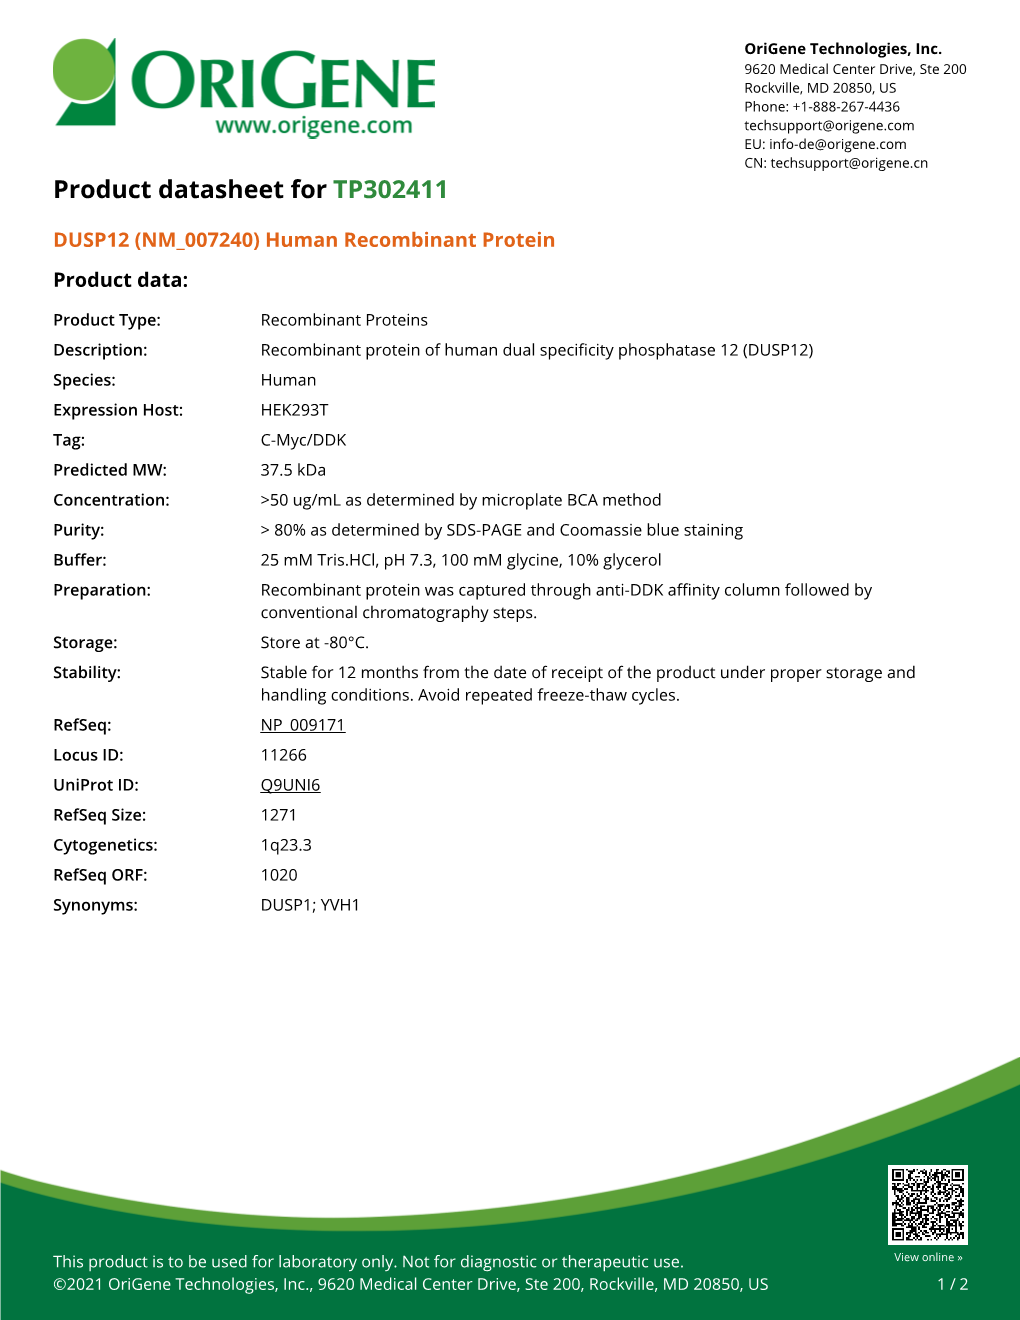 DUSP12 (NM 007240) Human Recombinant Protein Product Data